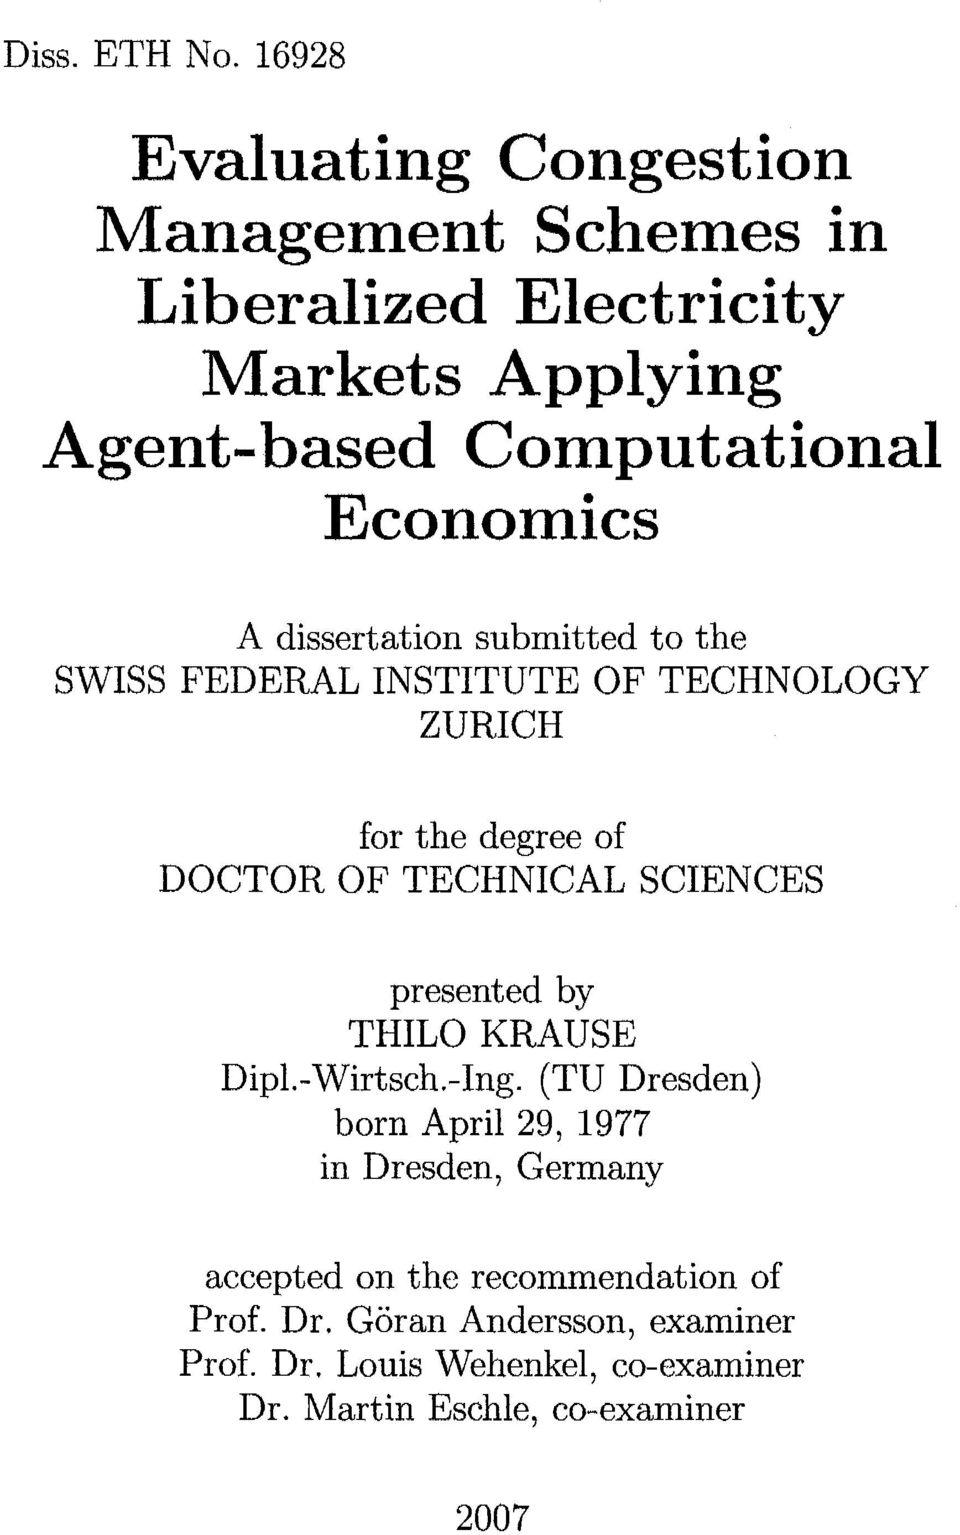 Econornics A dissertation submitted to the SWISS FEDERAL INSTITUTE OF TECHNOLOGY ZURICH for the degree of DOCTOR OF TECHNICAL